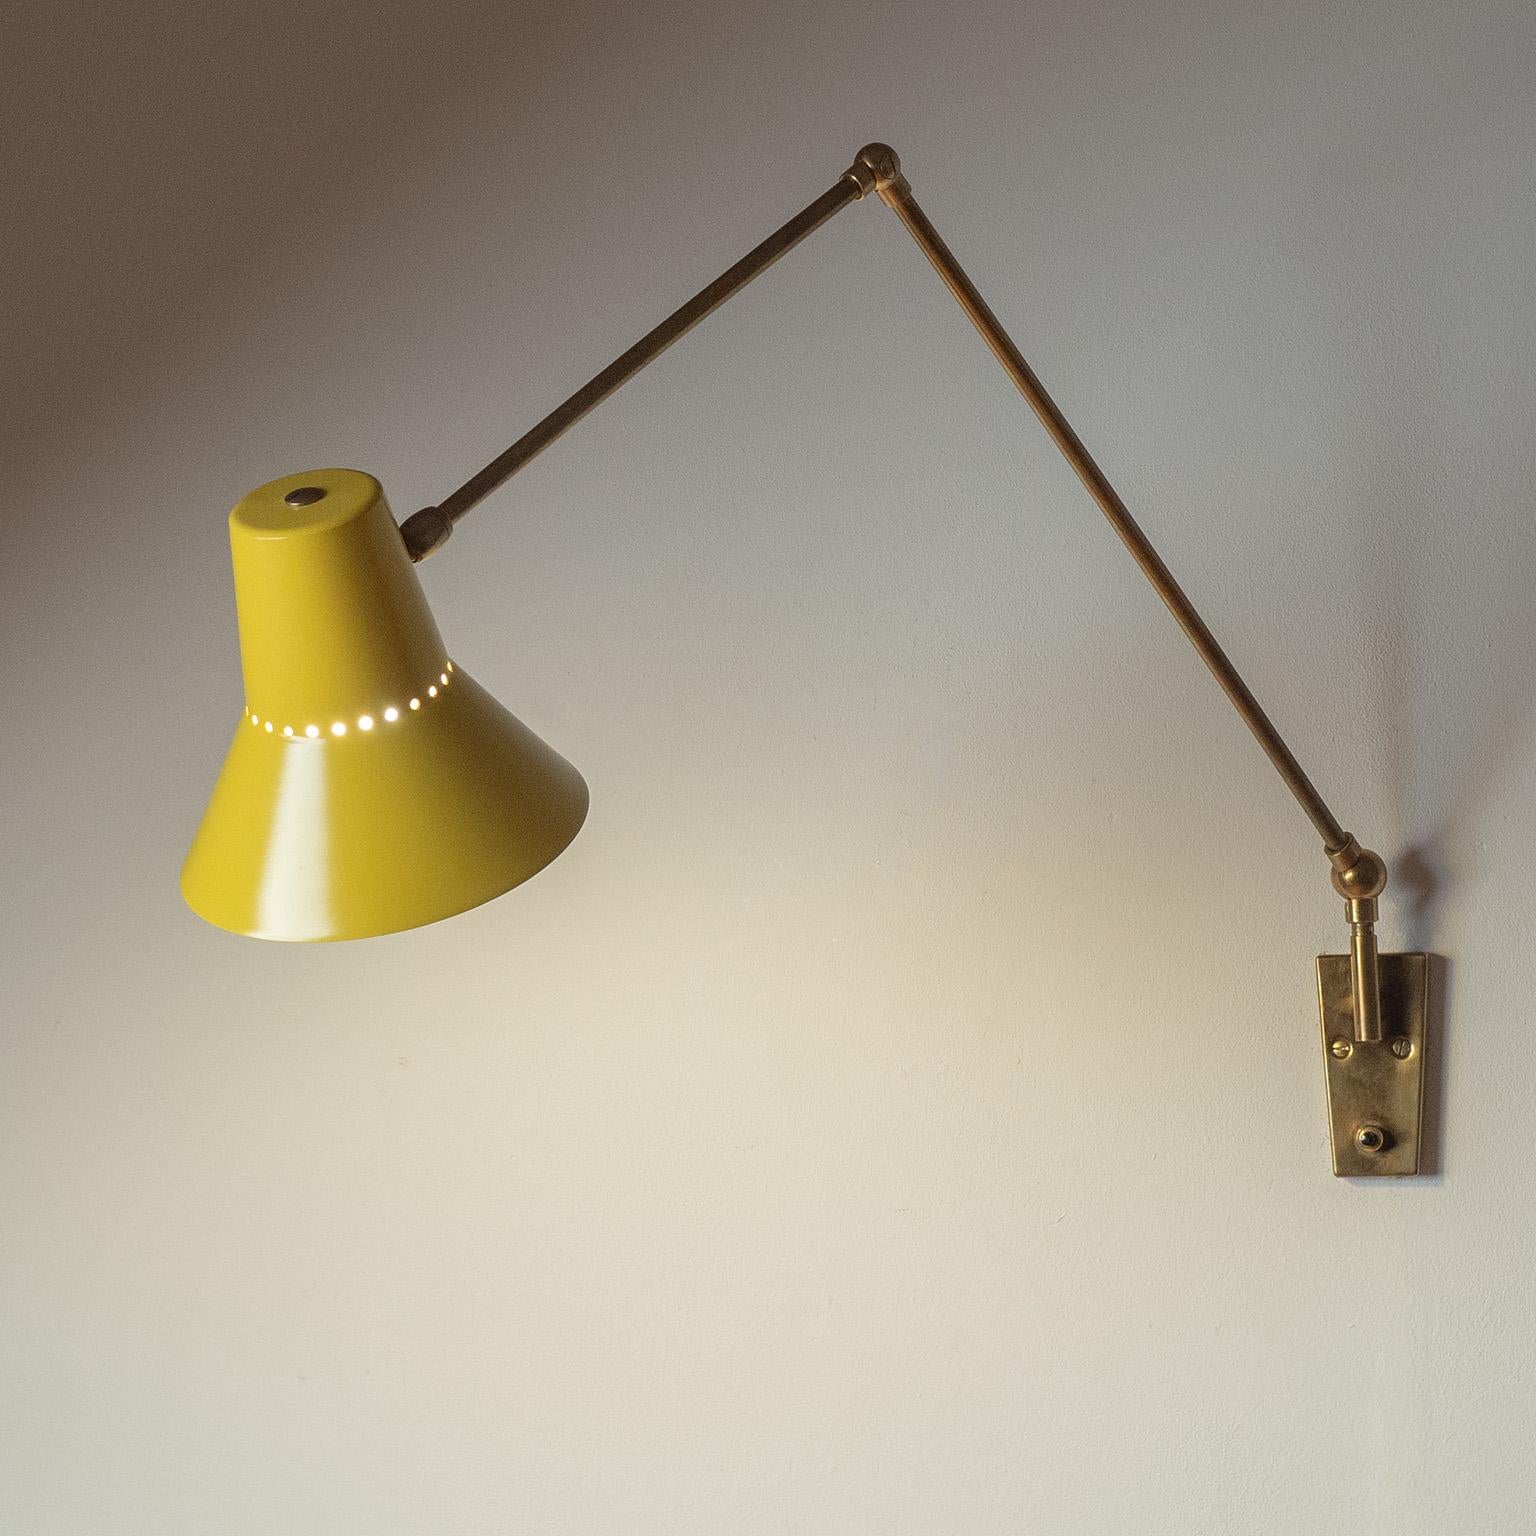 Italian Articulating Wall Light, 1950s For Sale 1